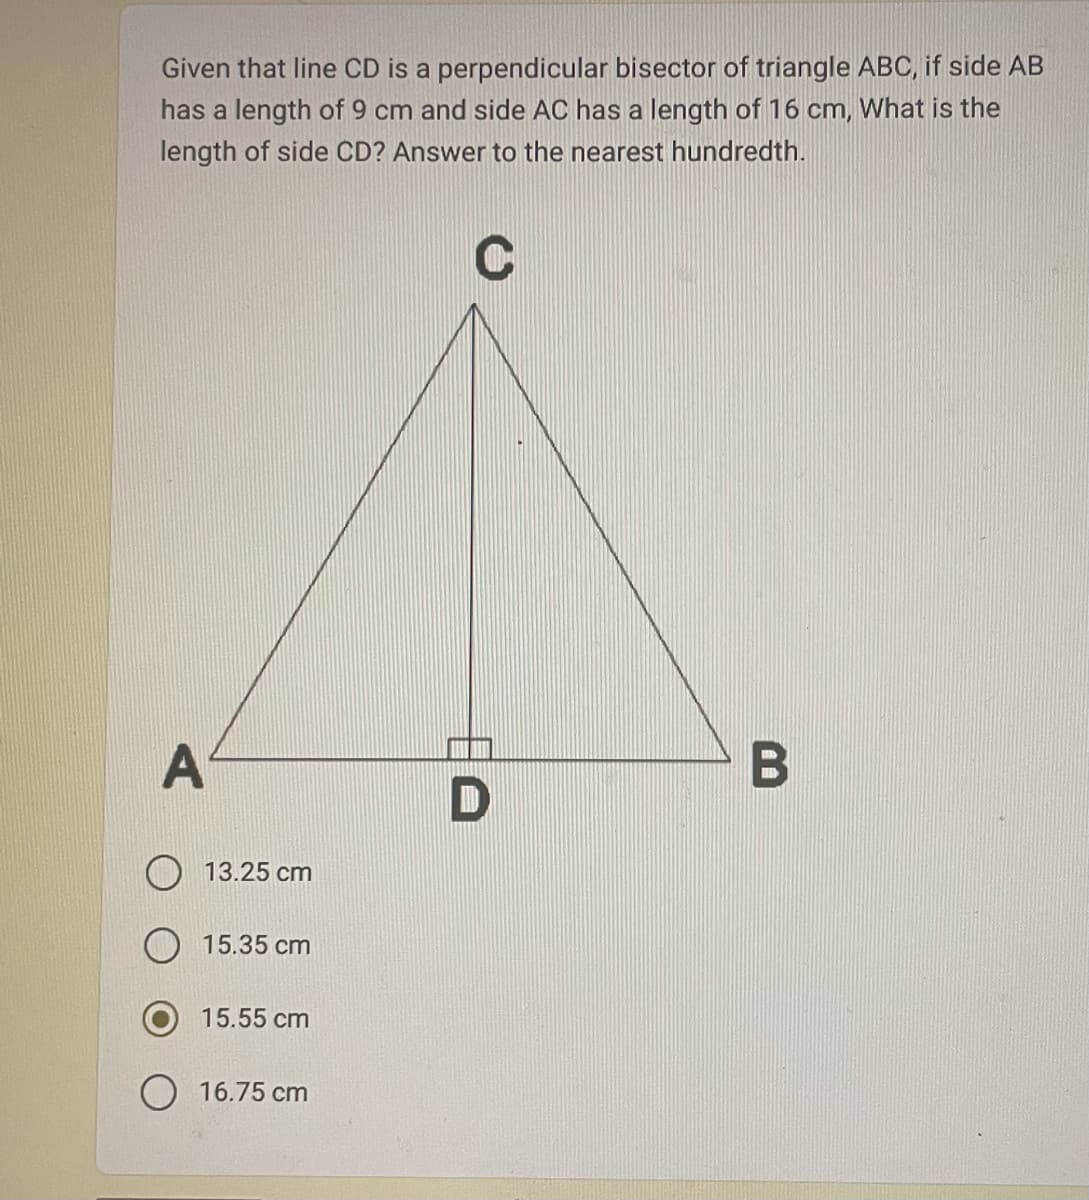 Given that line CD is a perpendicular bisector of triangle ABC, if side AB
has a length of 9 cm and side AC has a length of 16 cm, What is the
length of side CD? Answer to the nearest hundredth.
C
A
13.25 cm
15.35 cm
15.55 cm
O 16.75 cm
D
B